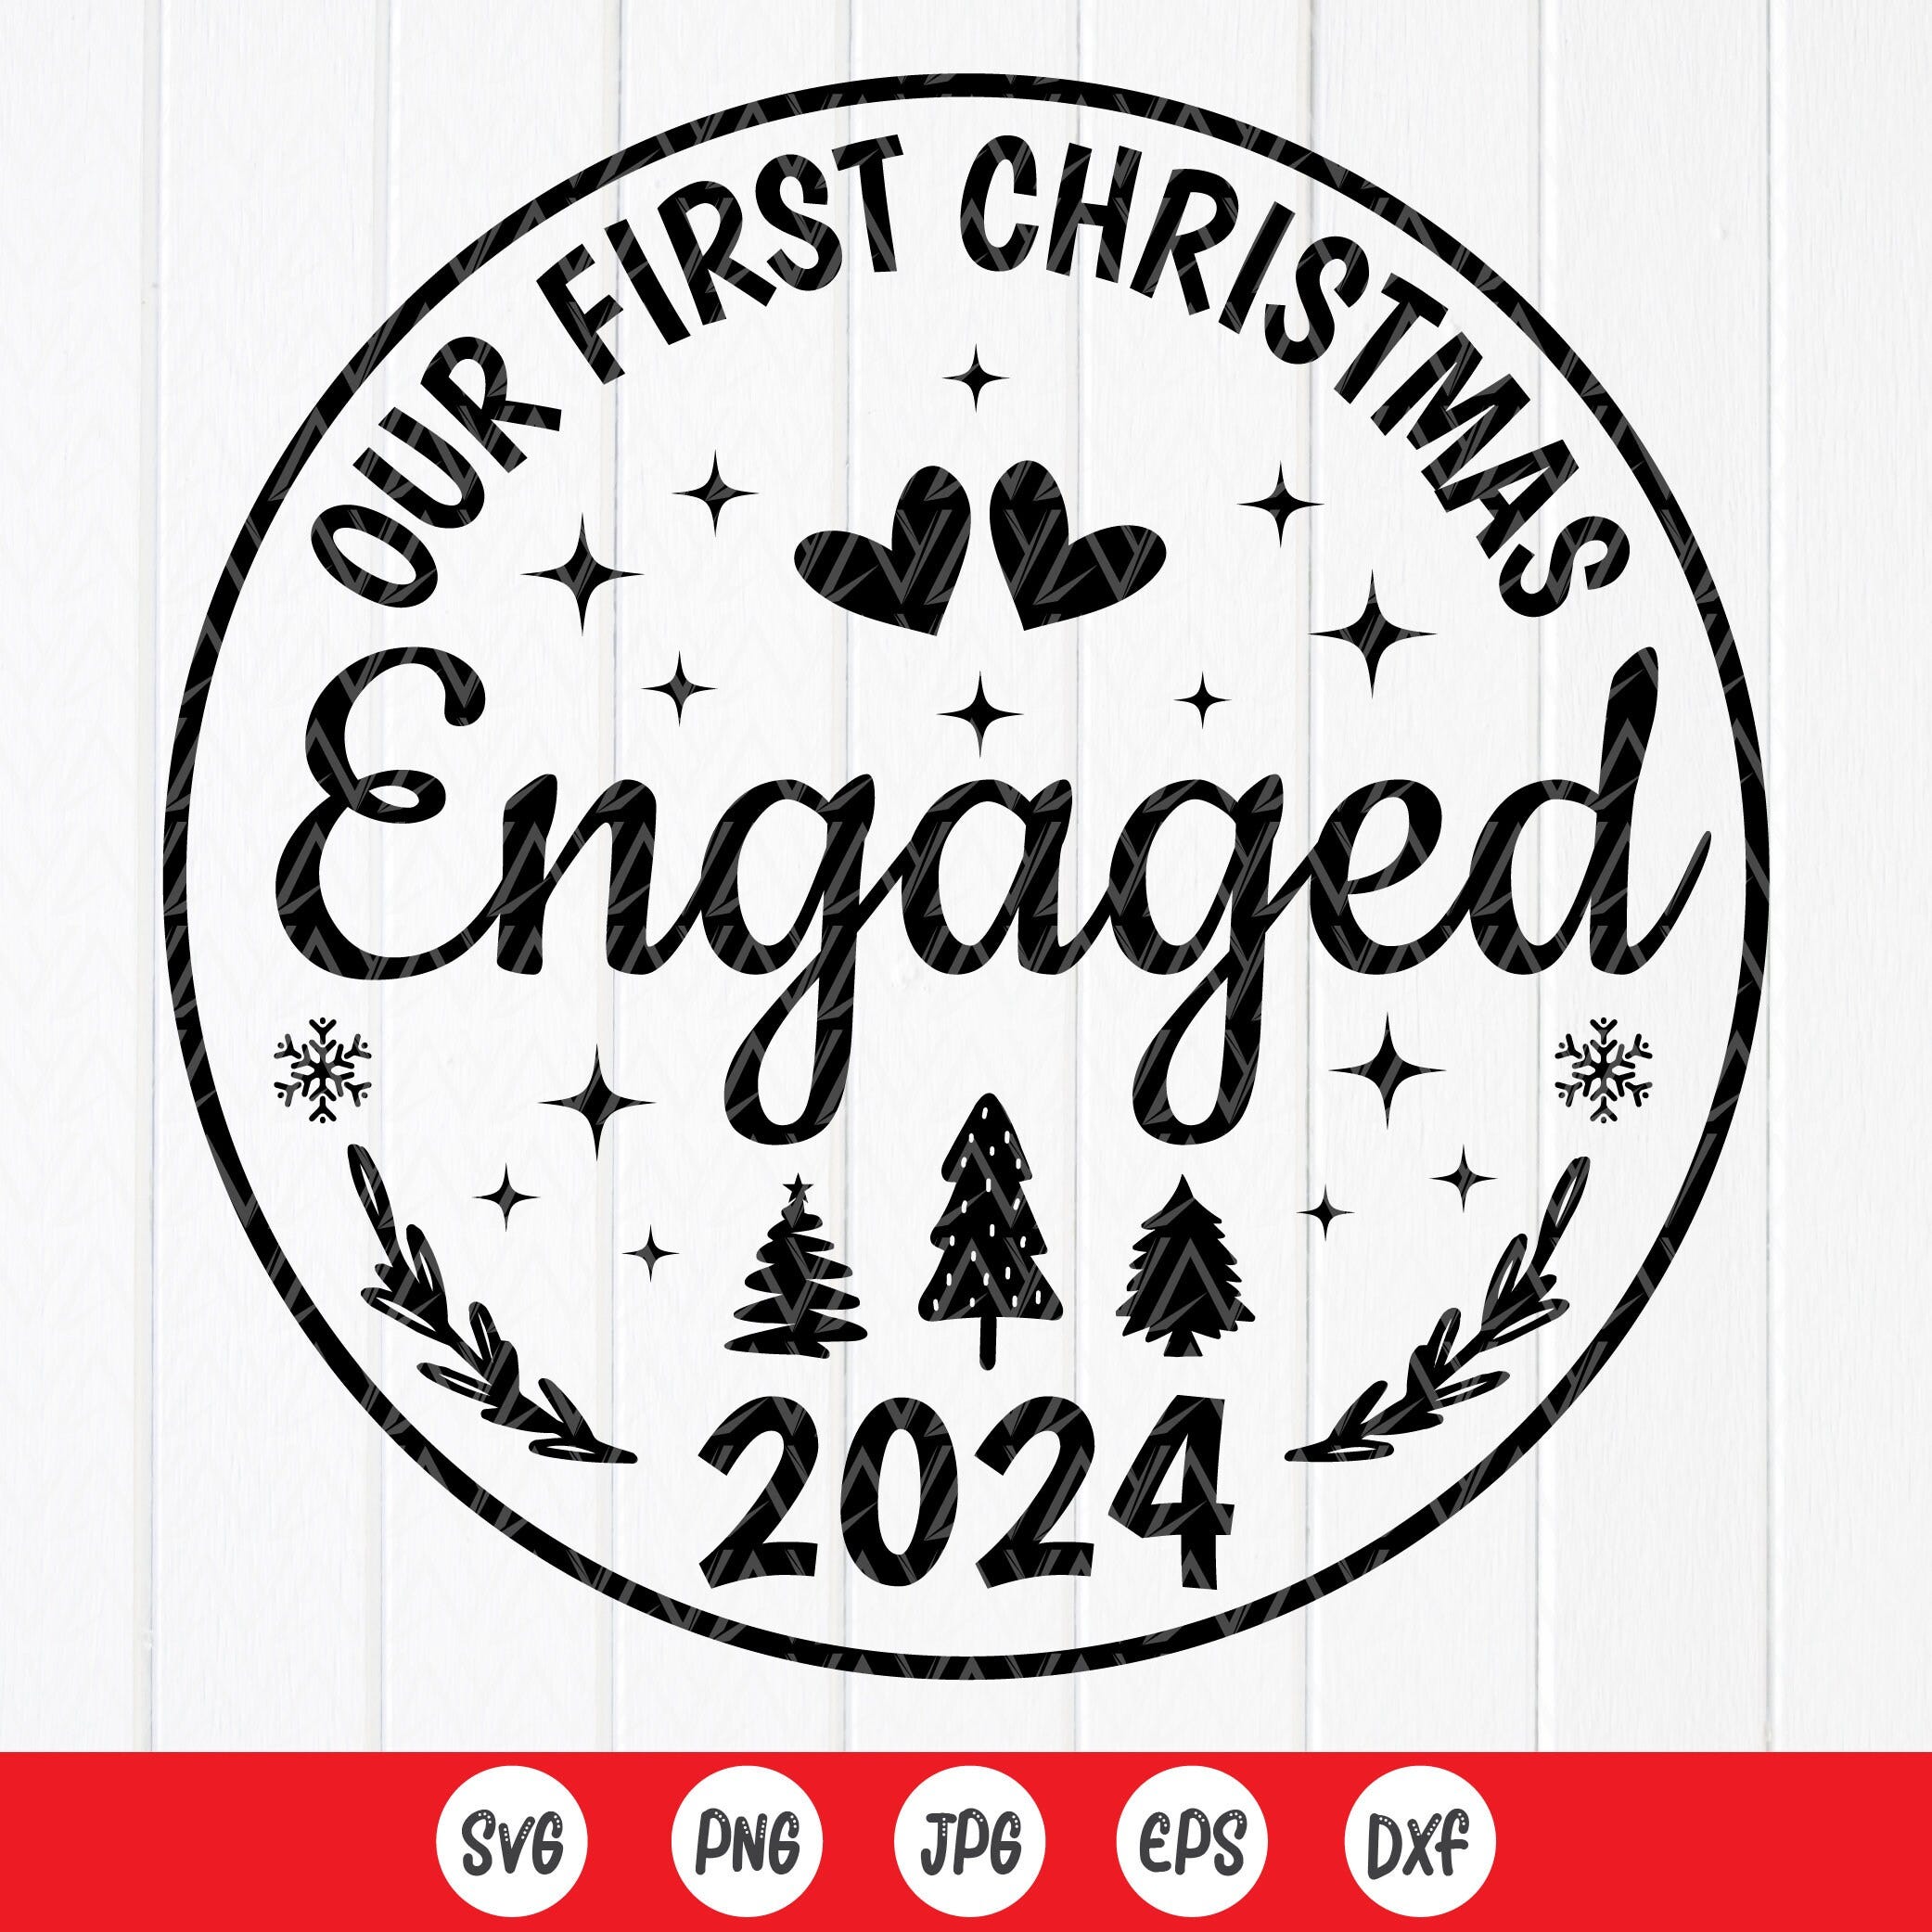 Our First Christmas Engaged 2024 SVG,Couples Christmas Gift ,Engaged svg,Christmas Engagement Ornament SVG,Instant Download files for Cricut